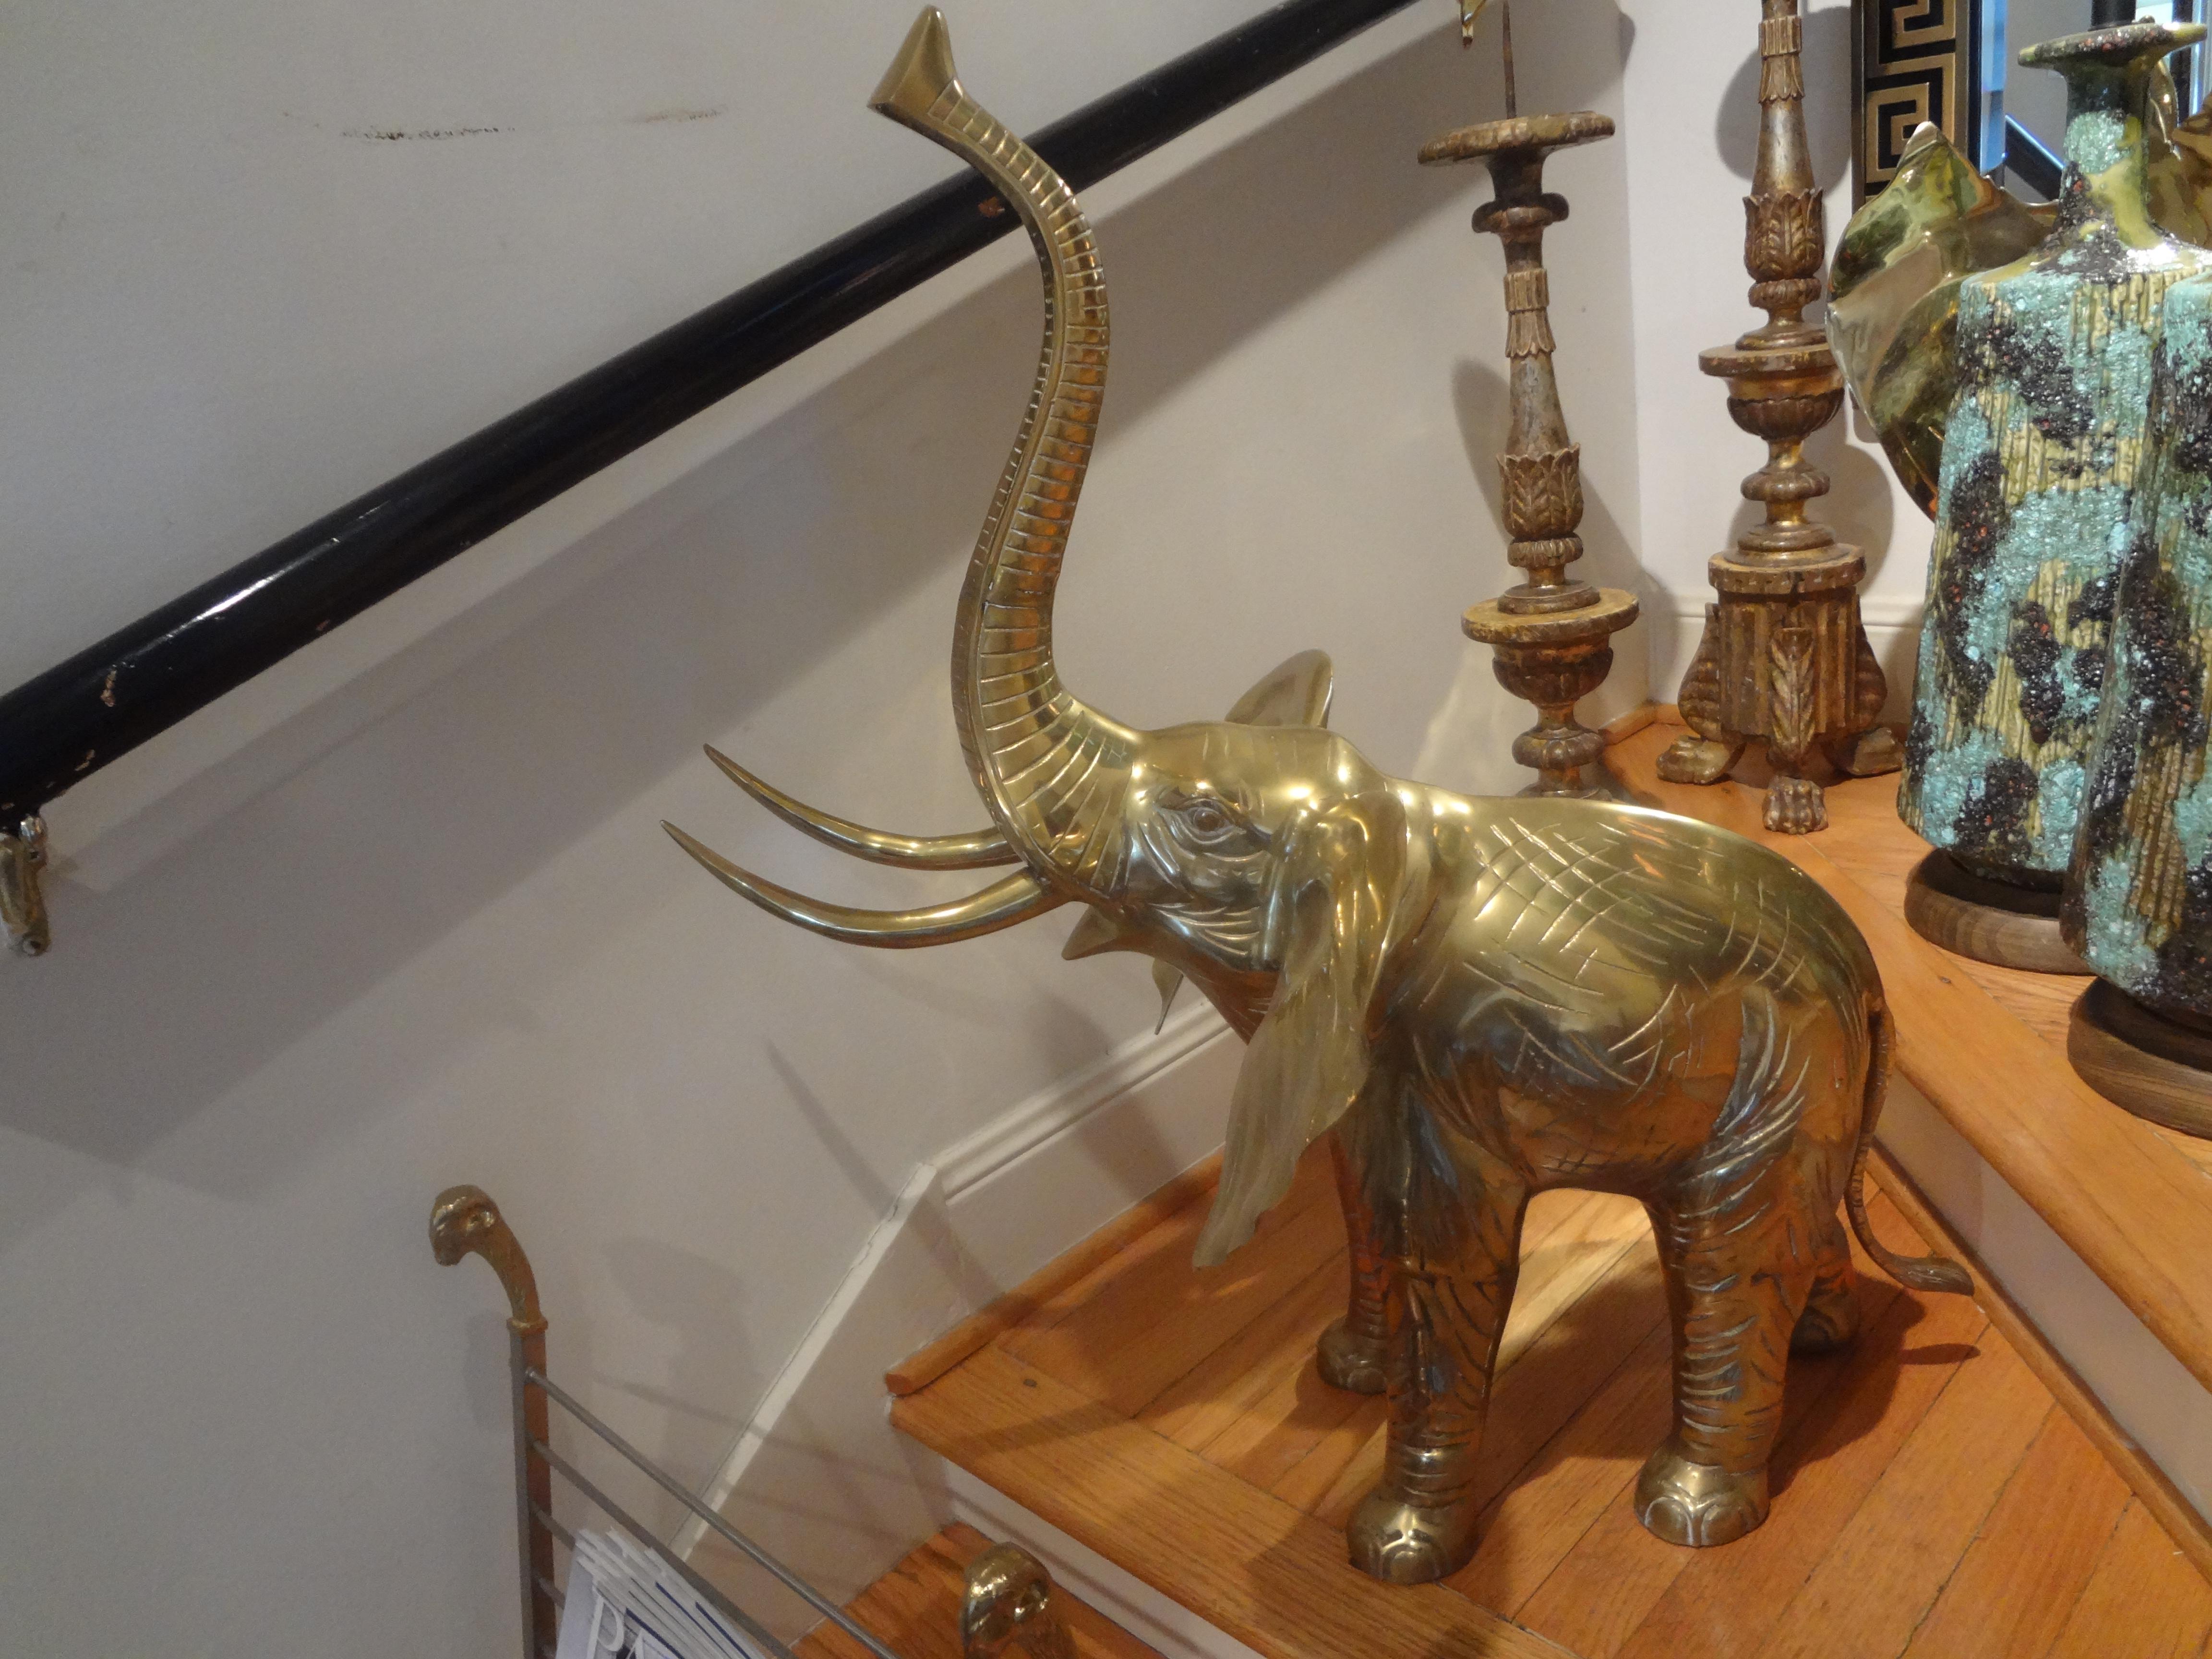 Large brass elephant statue. This stunning realistic Hollywood Regency brass elephant figure or sculpture has great detailing and patina.